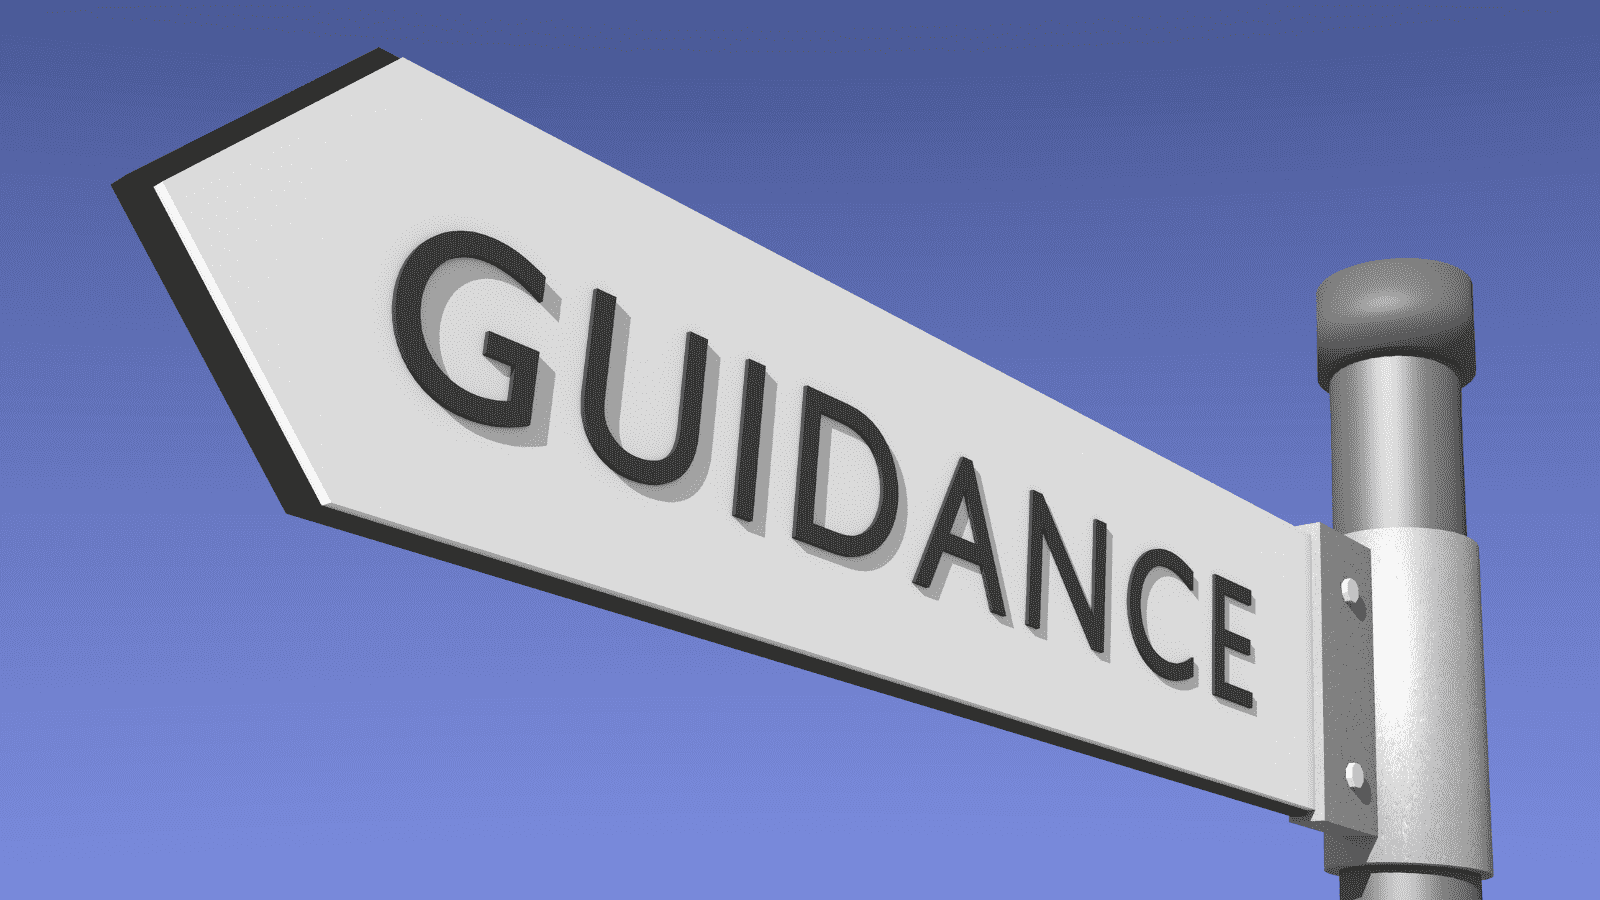 Guidance issued by the FMA